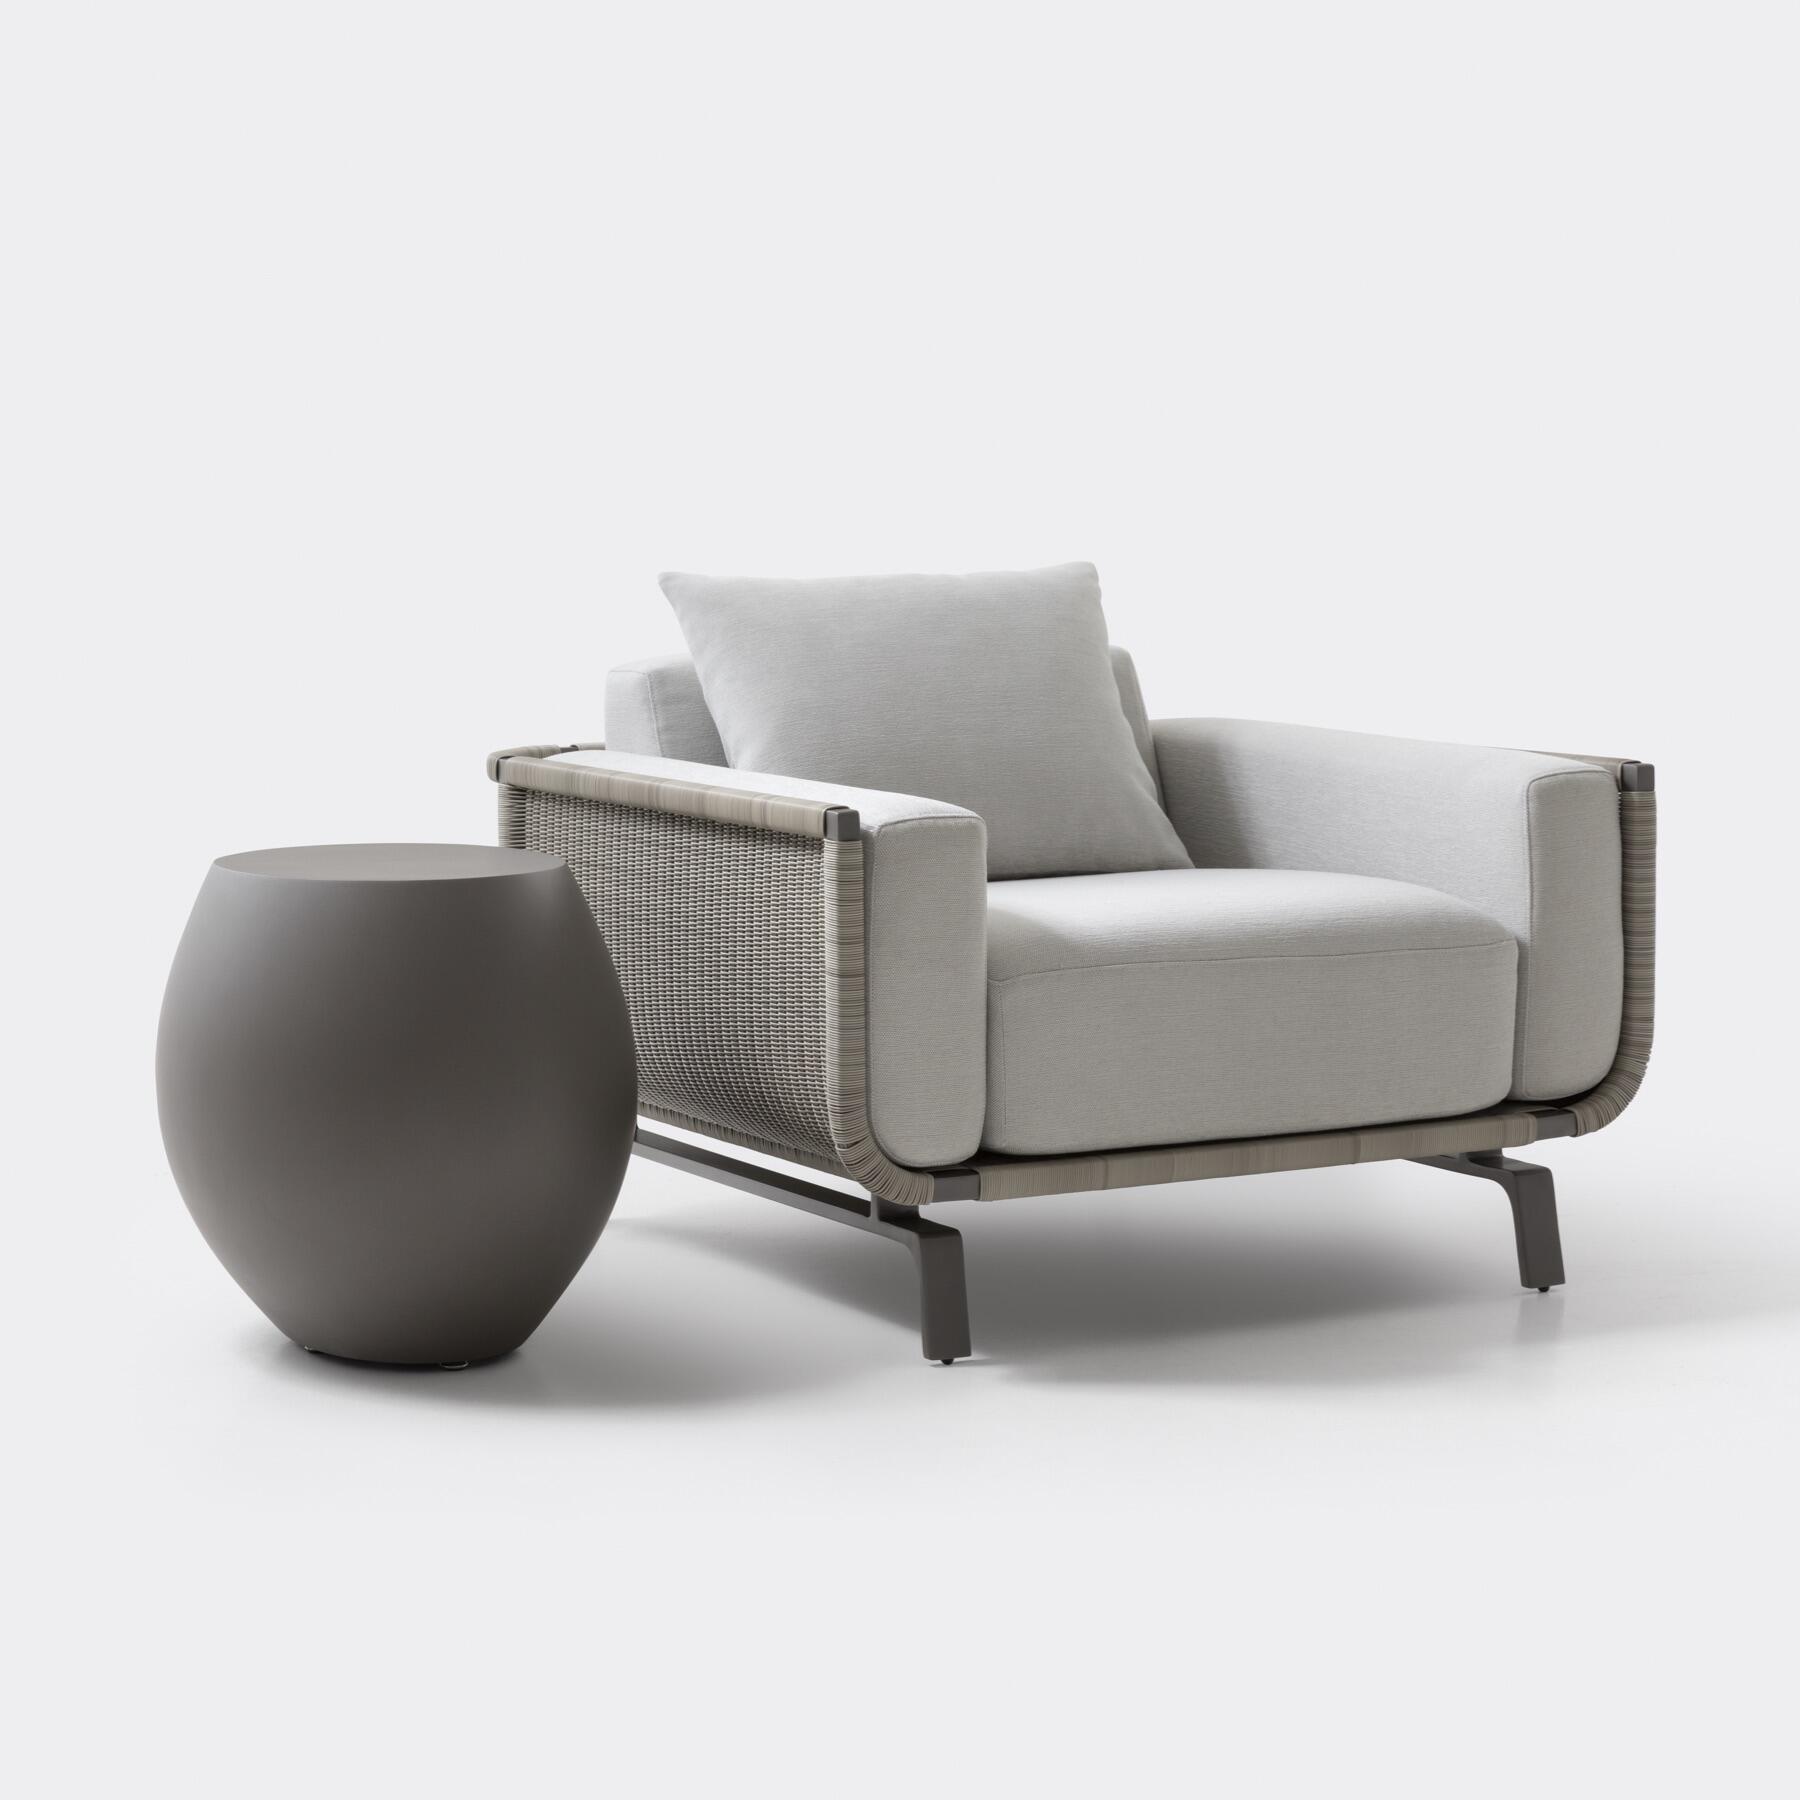 Plateau Side Table, Oyster, Shown with Tortuga Sectional